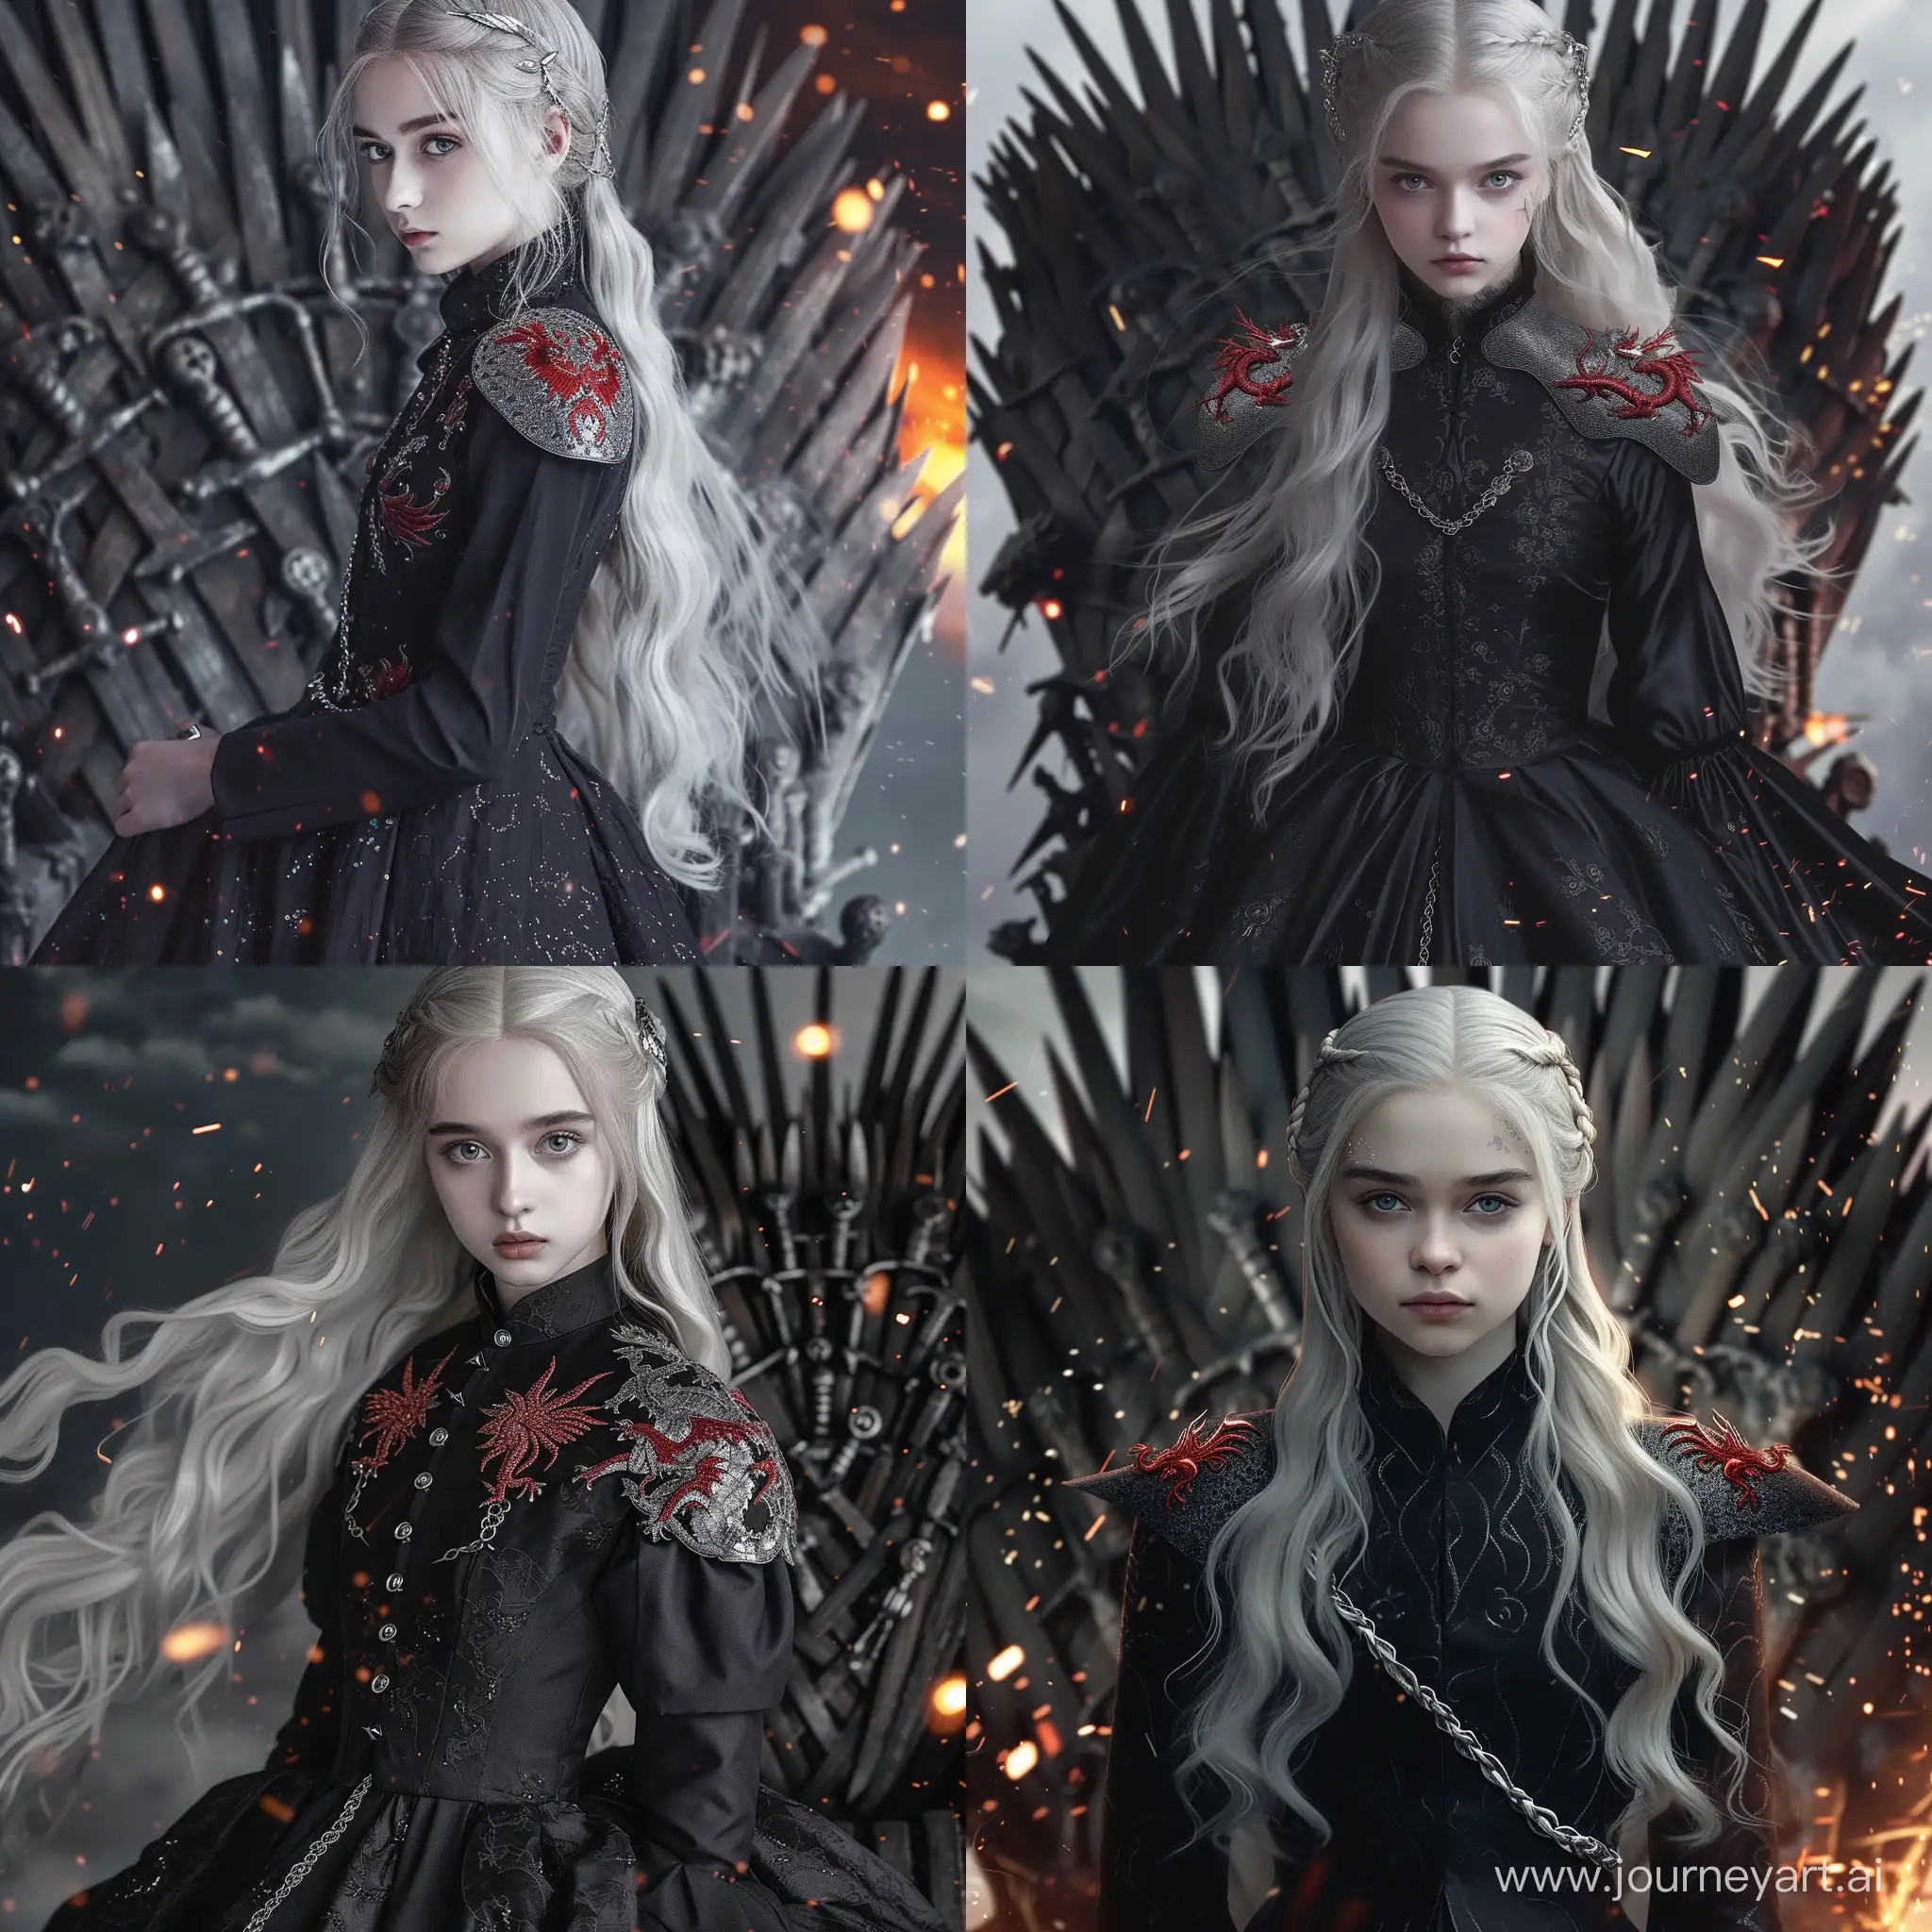 A Targaryen girl with snow-white long hair and gray eyes, she is wearing a black floor-length dress with a pattern of red dragons on her shoulders and silver embroidery, gloomy style, Game of Thrones, against the background of the Iron Throne and sparks of flame